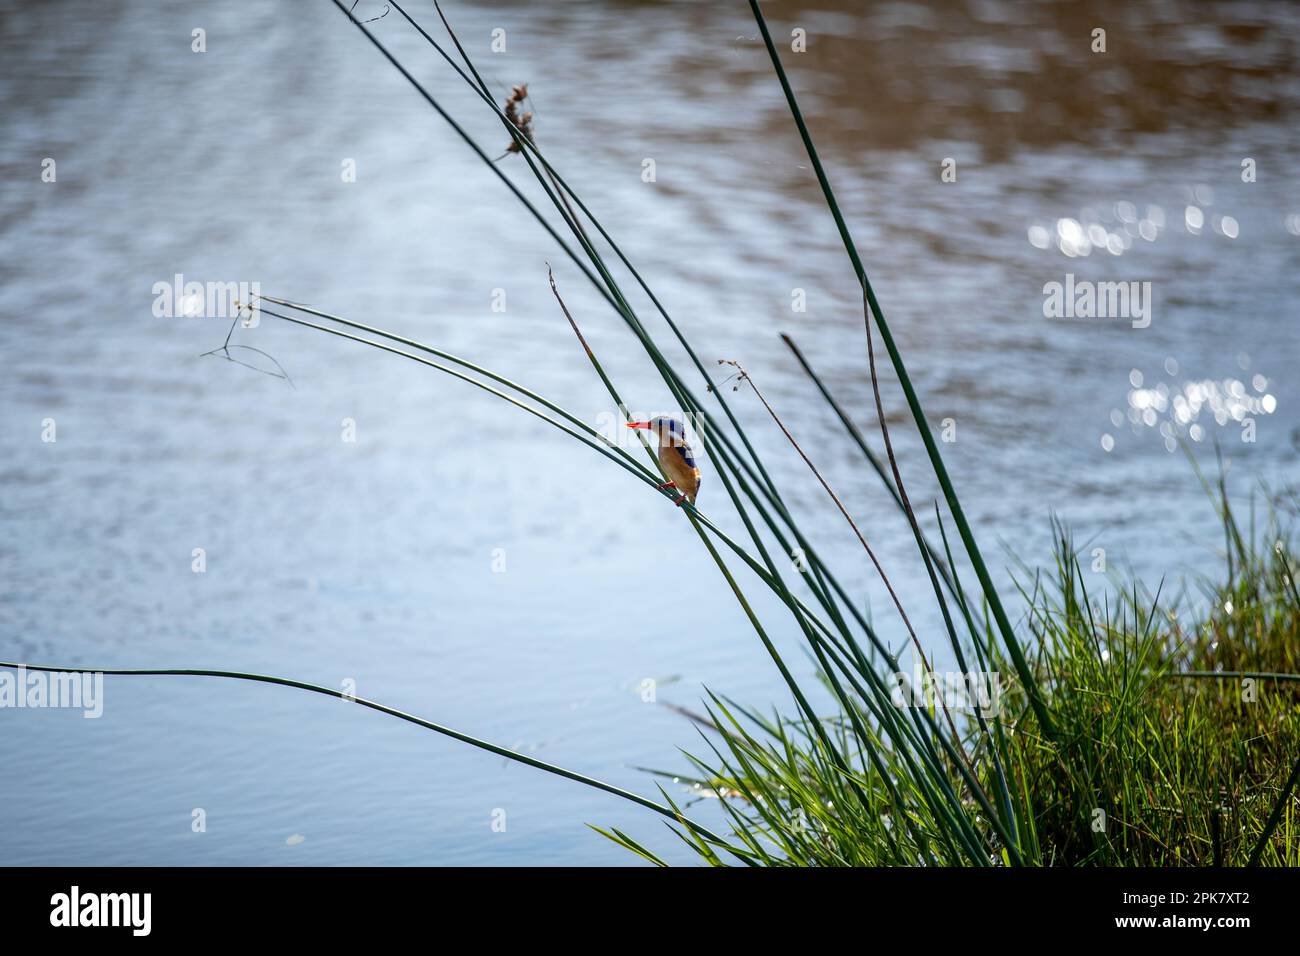 A Malachite Kingfisher, Corythornis cristatus, perched on a reed, next to a river. Stock Photo